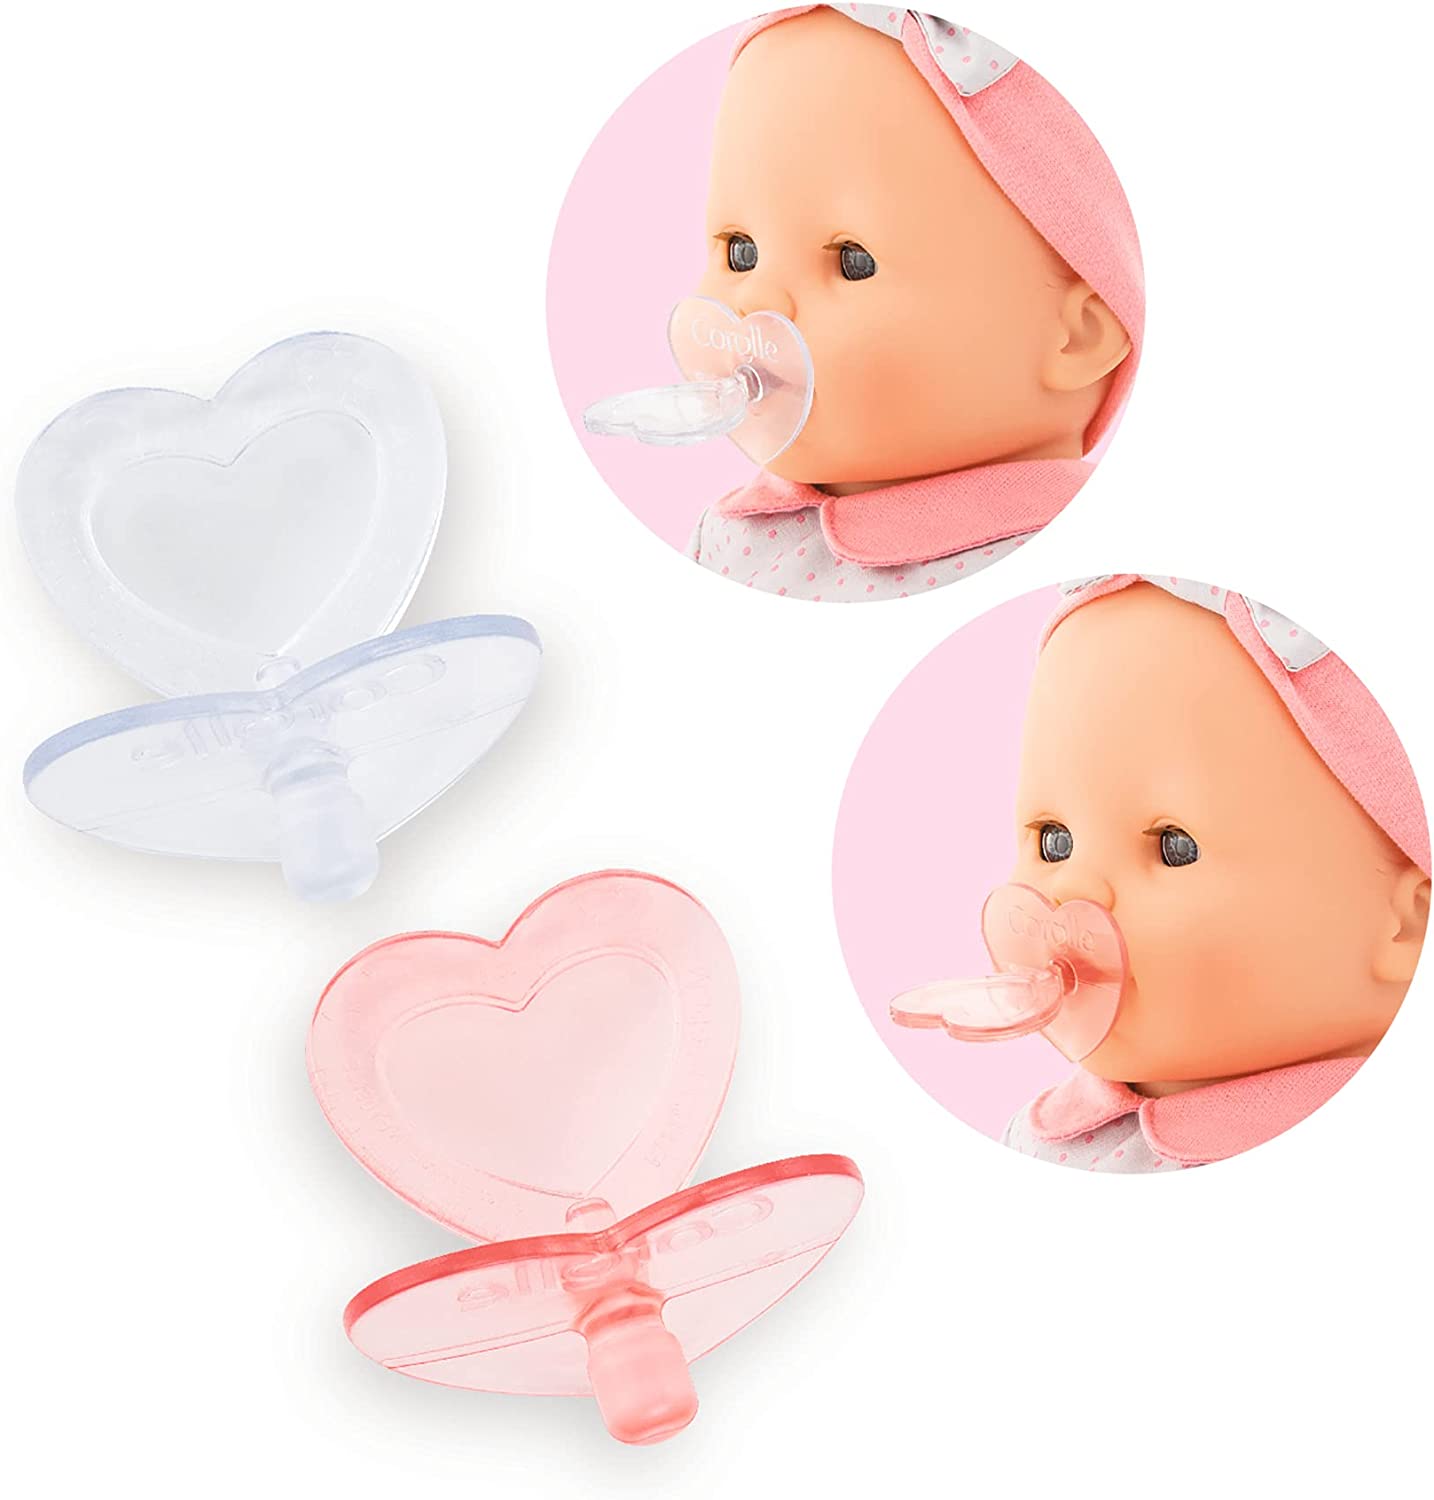 Corolle - Heart Shaped Doll Pacifier Accessory for 14-17" Dolls, 2 Pack, Clear/Pink (140370) - image 2 of 5